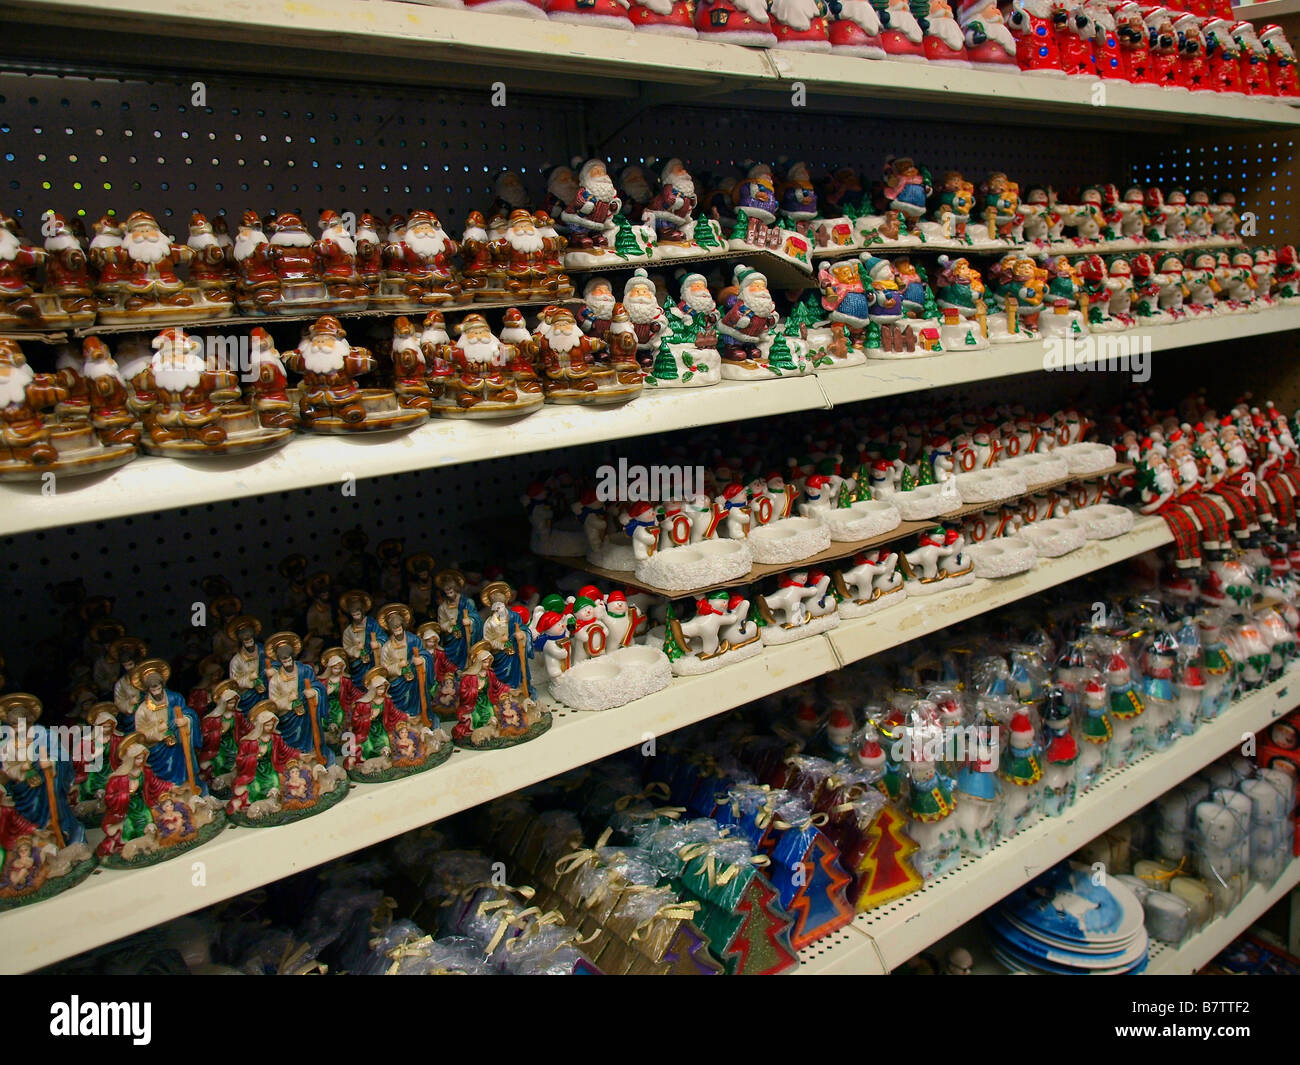 Inexpensive holiday figurines on display for retail sale. Stock Photo